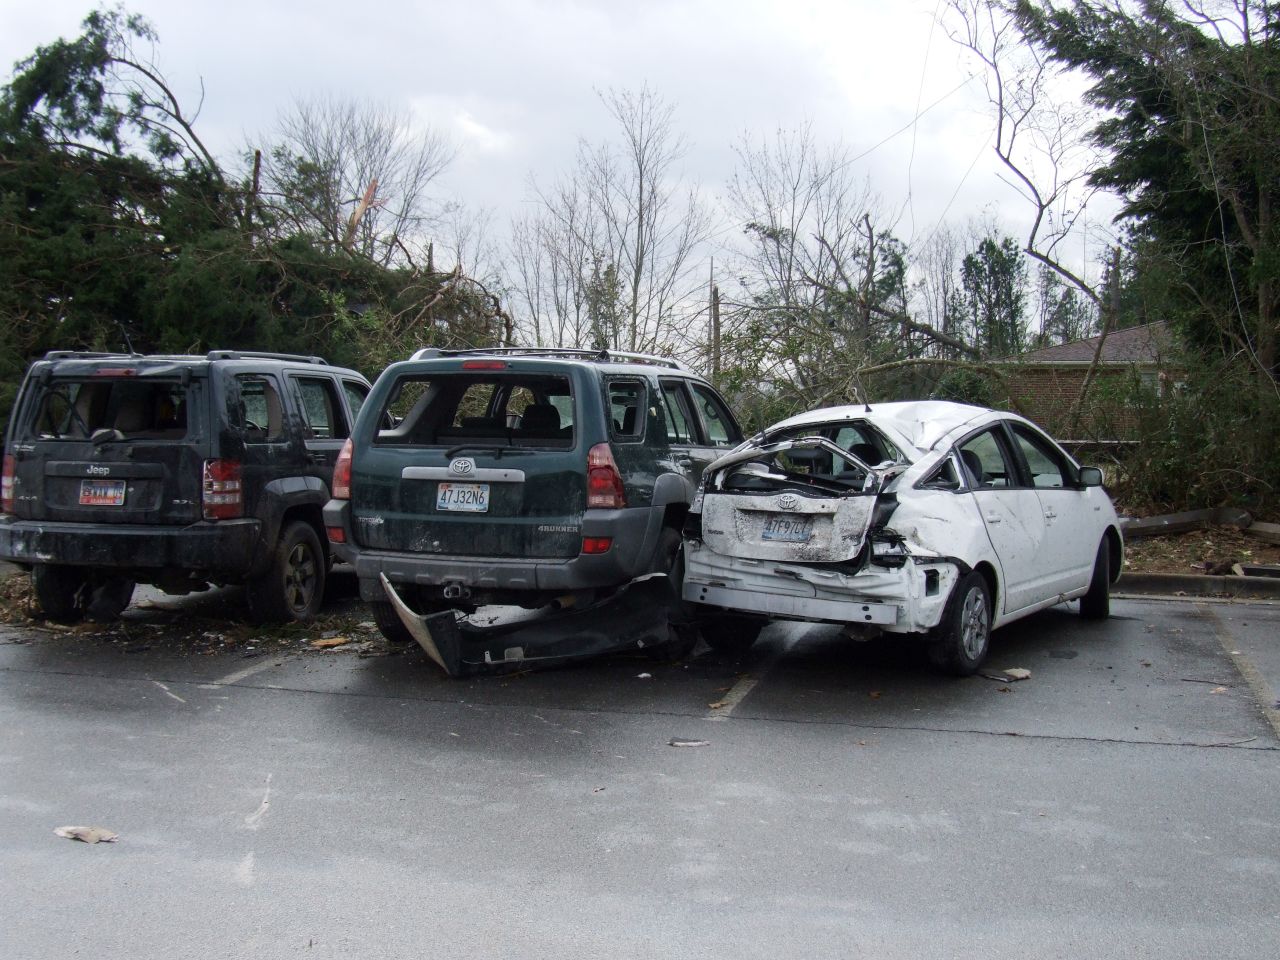 iRepoterer Blair Scott took this photo of damaged cars at Buckhorn High School in Hunstville, Alabama, after the school was hit by one of Friday's tornadoes.